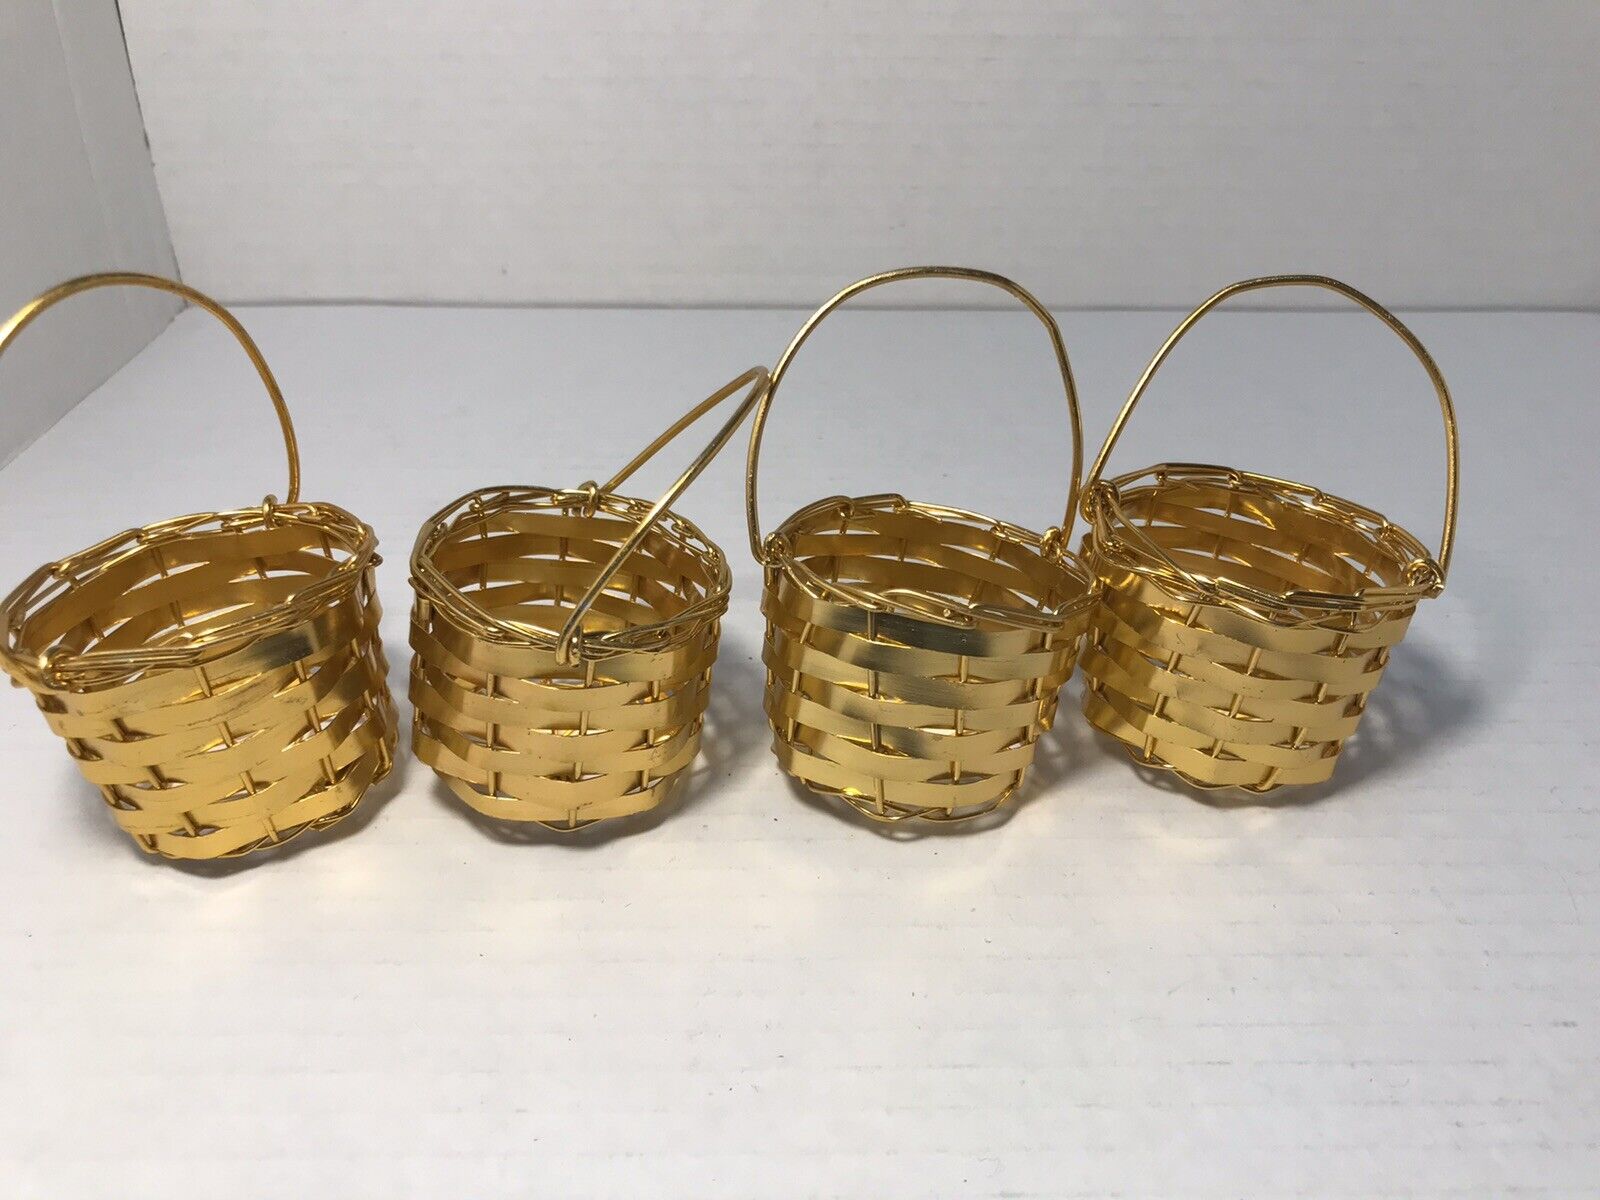 4 Baskets Mini Miniature Wire Woven Gifts Metal Brass  Colored 2 x 2 Inch